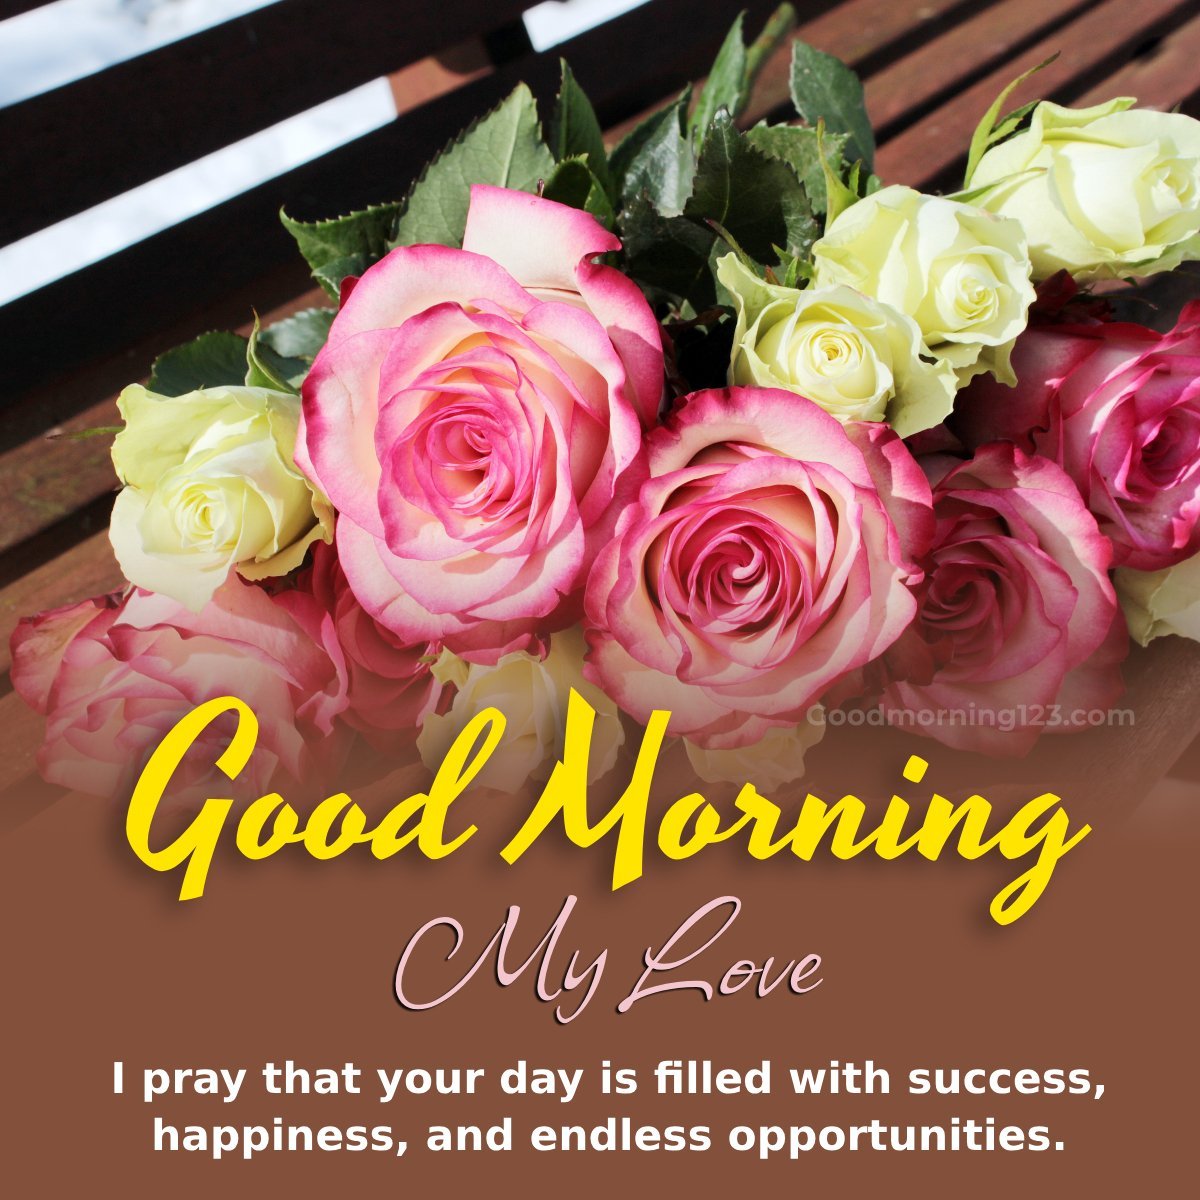 I Pray That Your Day Is Filled With Success, Happiness